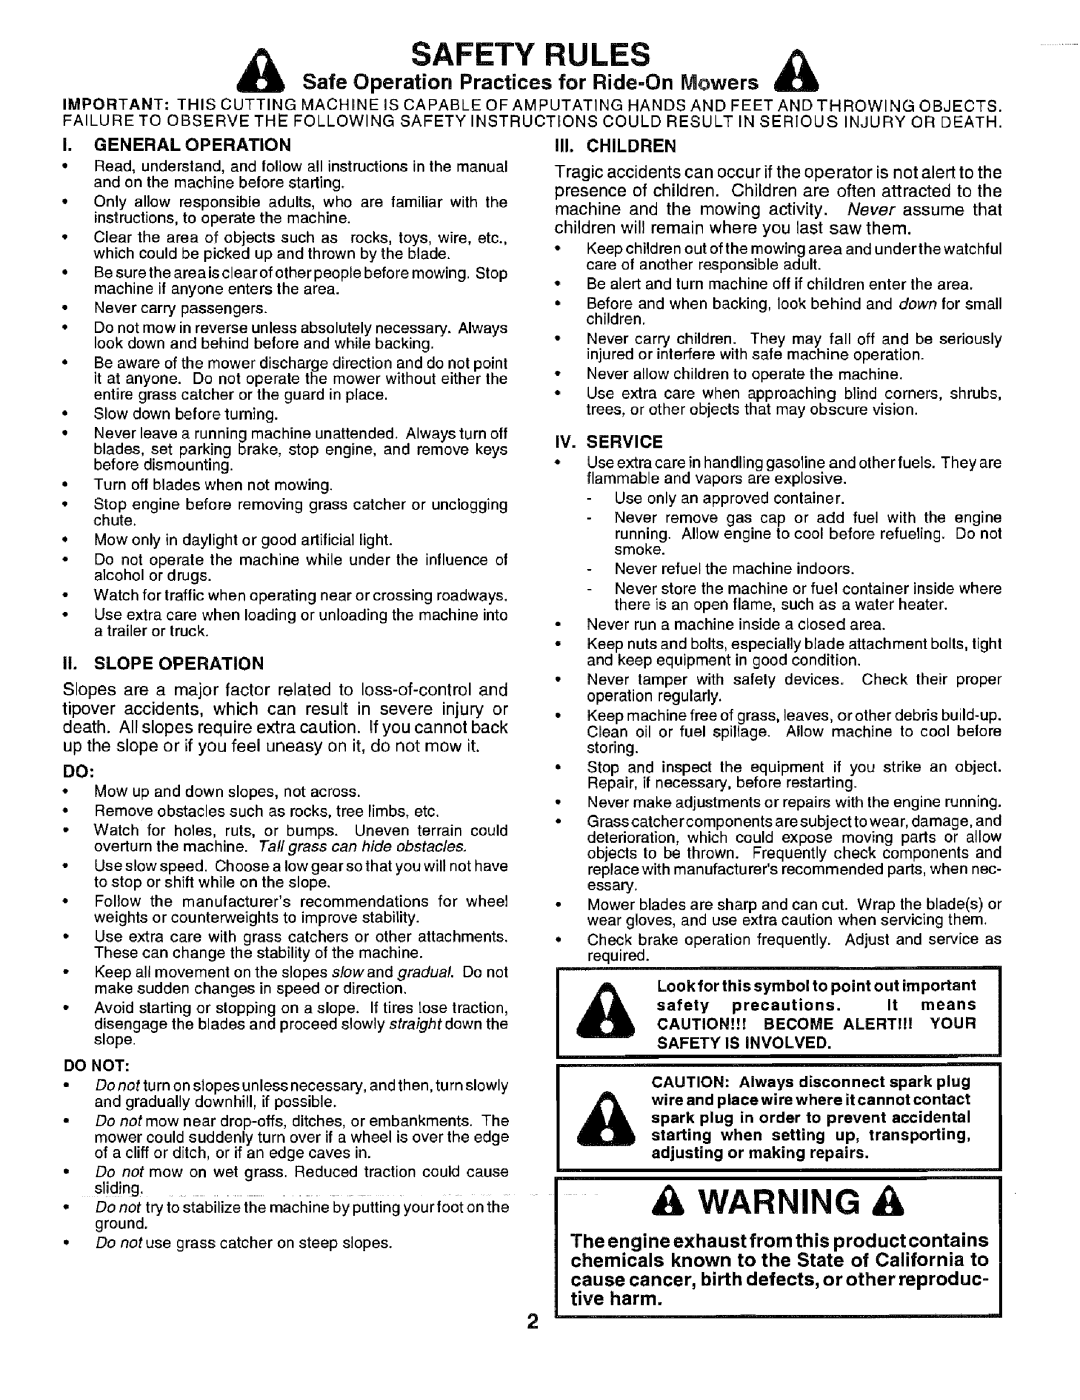 Craftsman 917.256544 owner manual Warning, Safety Rules, Safe Operation Practices for Ride-On Mowers 